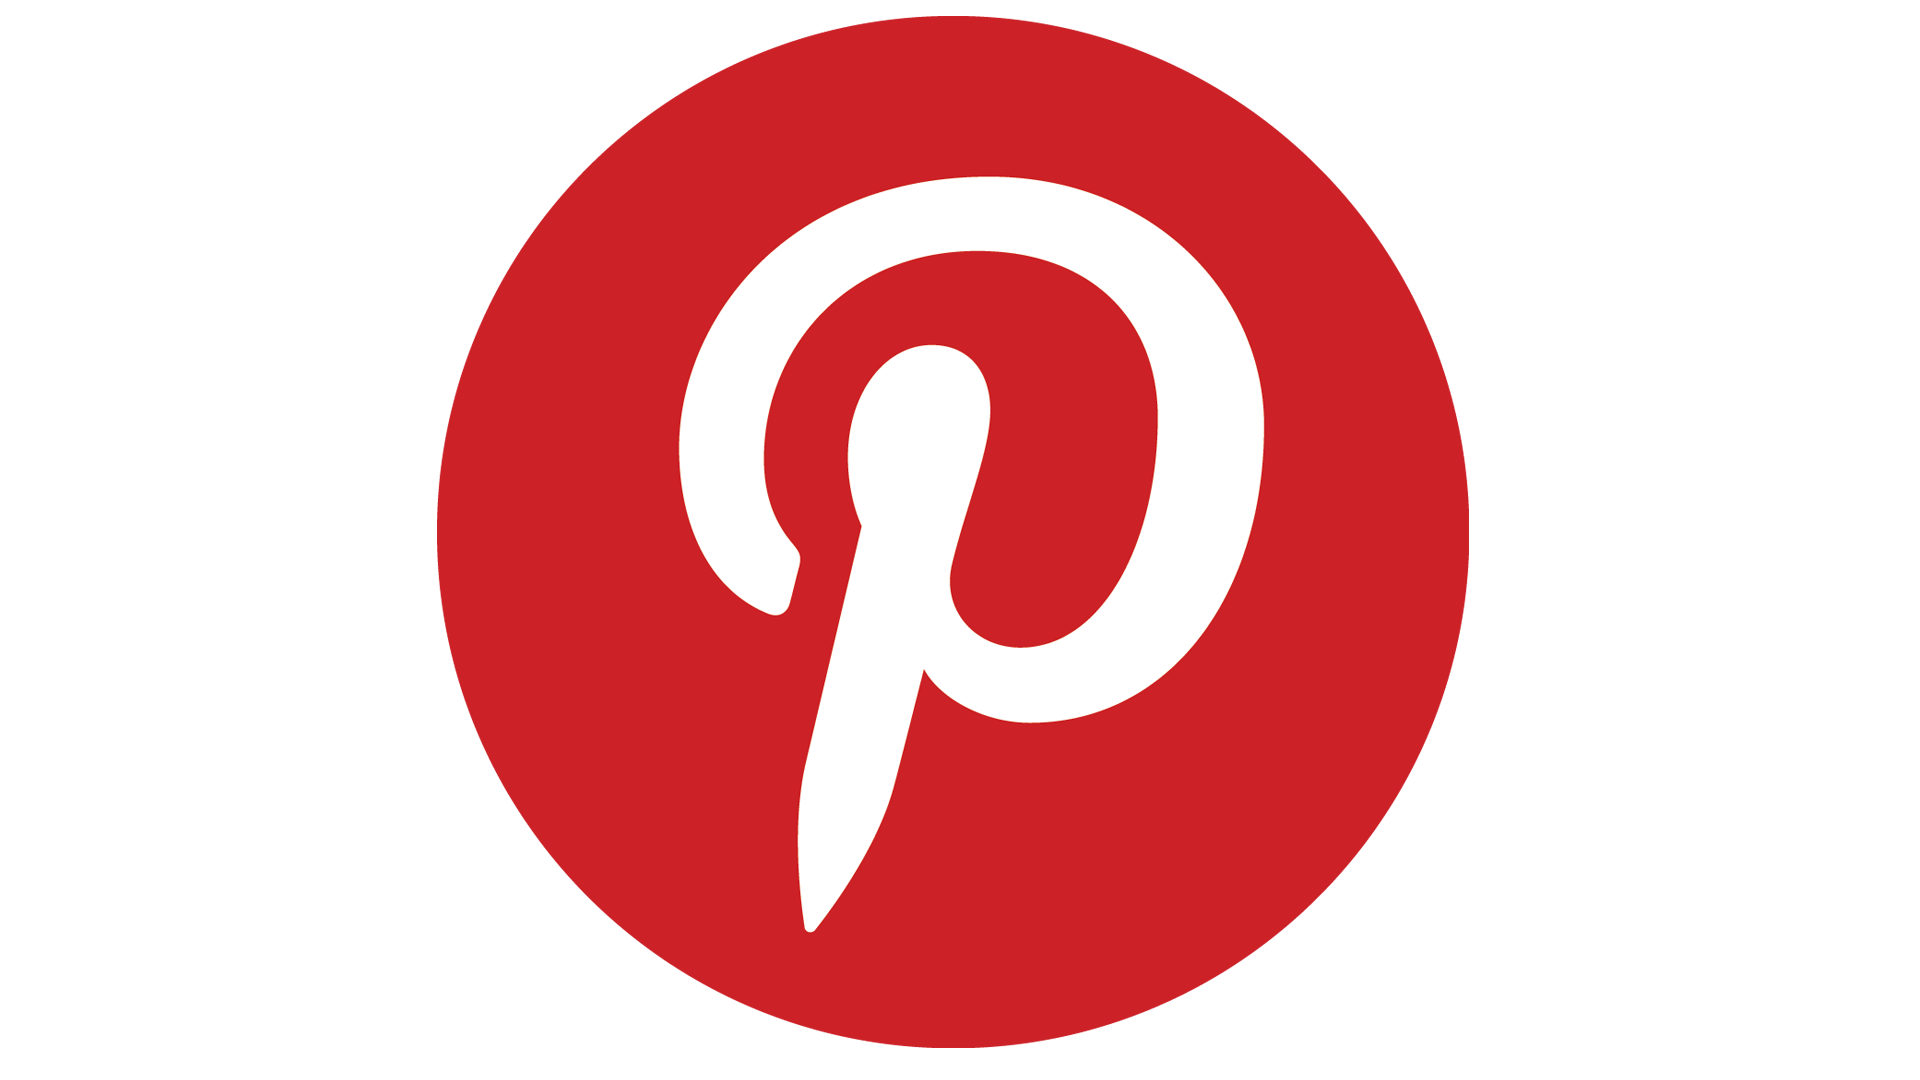 How do I download HD quality videos from Pinterest?